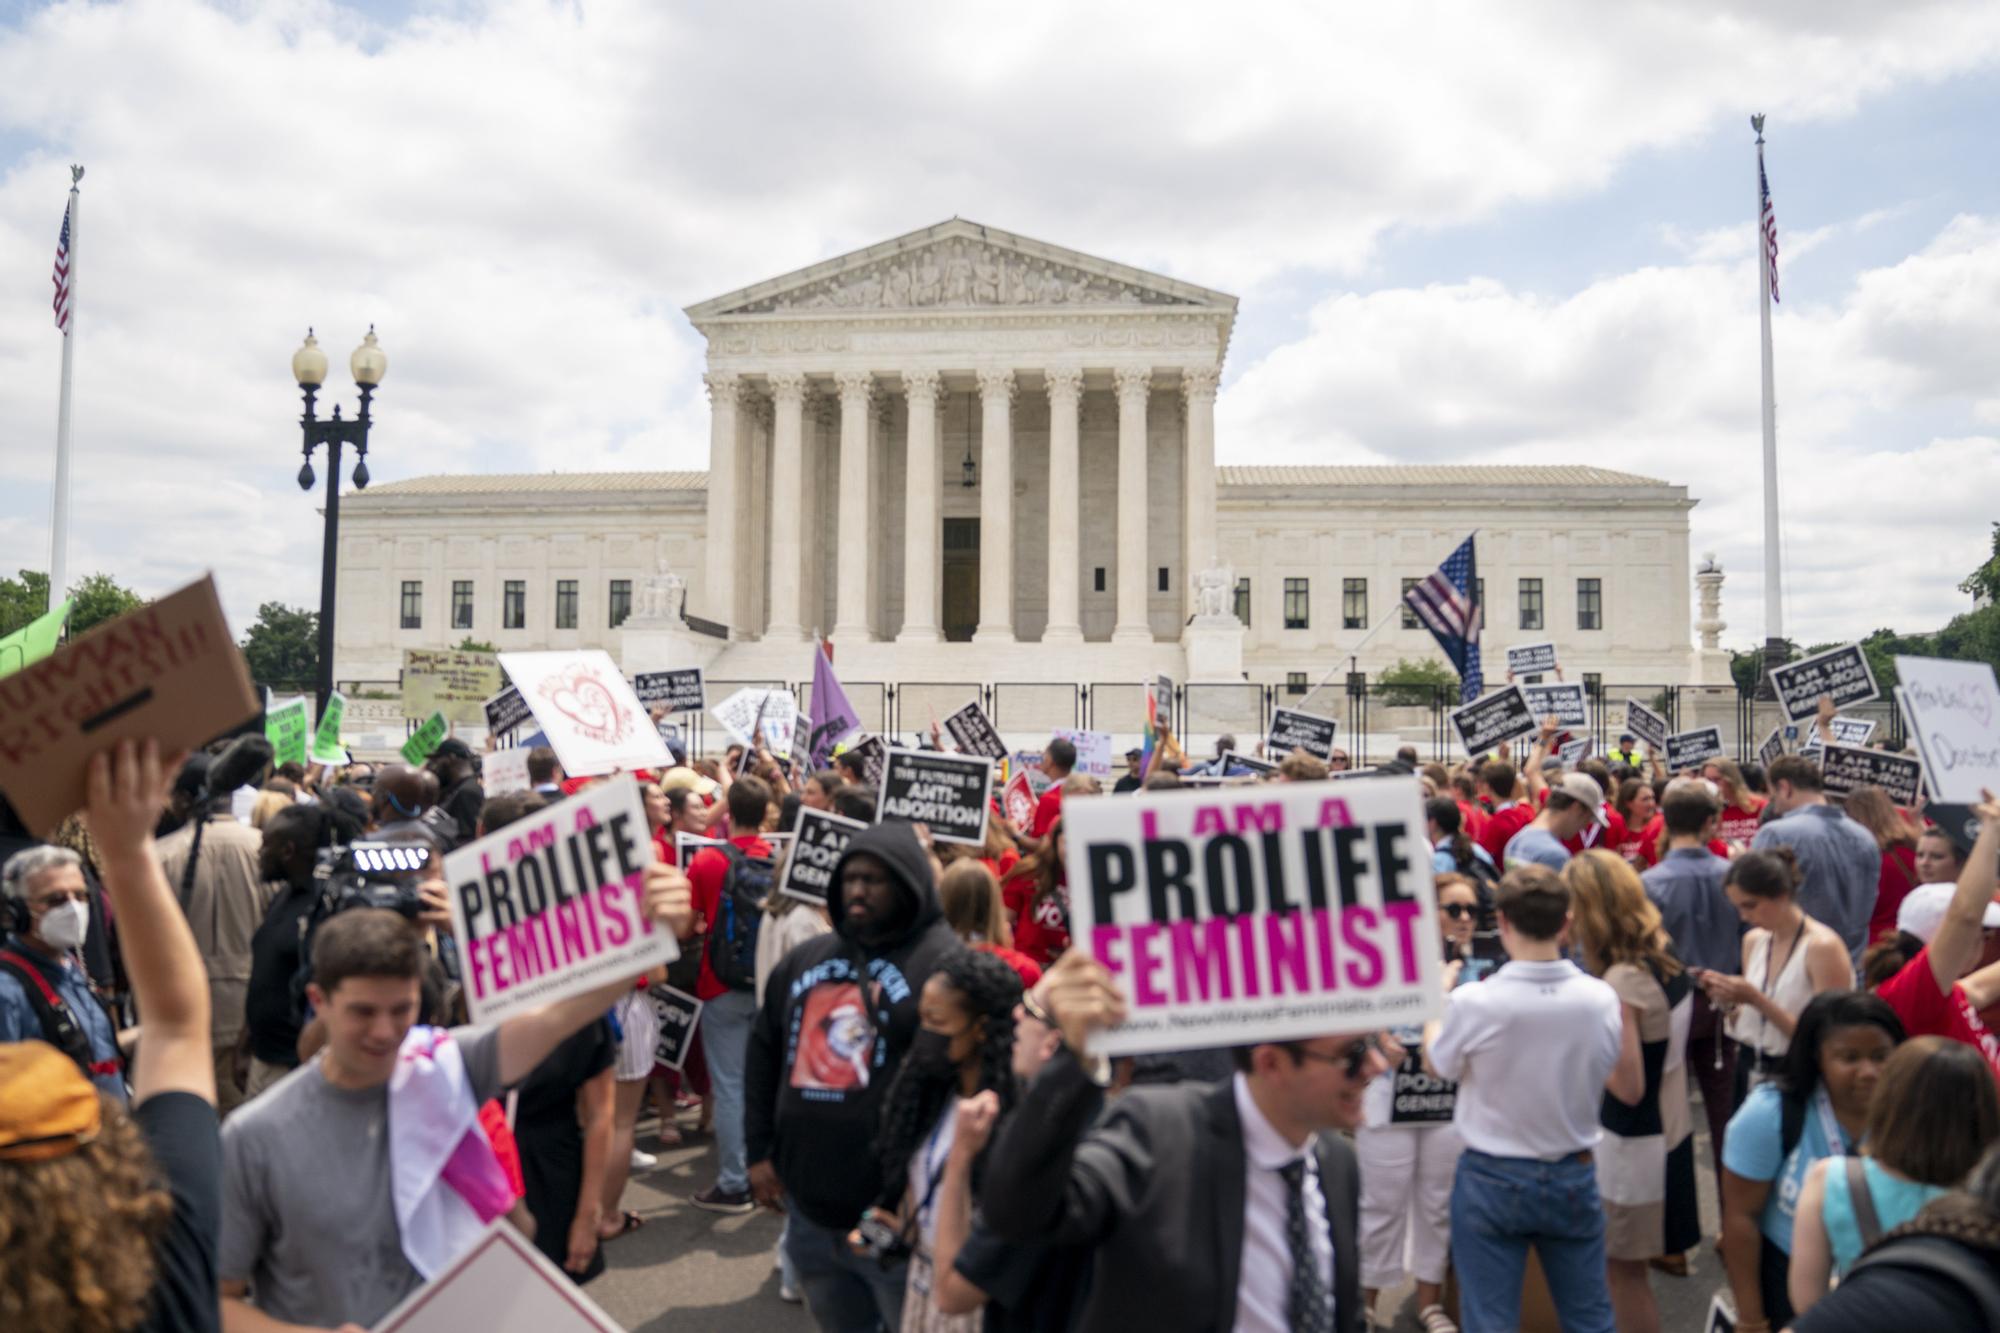 The US Supreme Court overturns the legalization of abortion in the Roe v. Wade case of 1973.